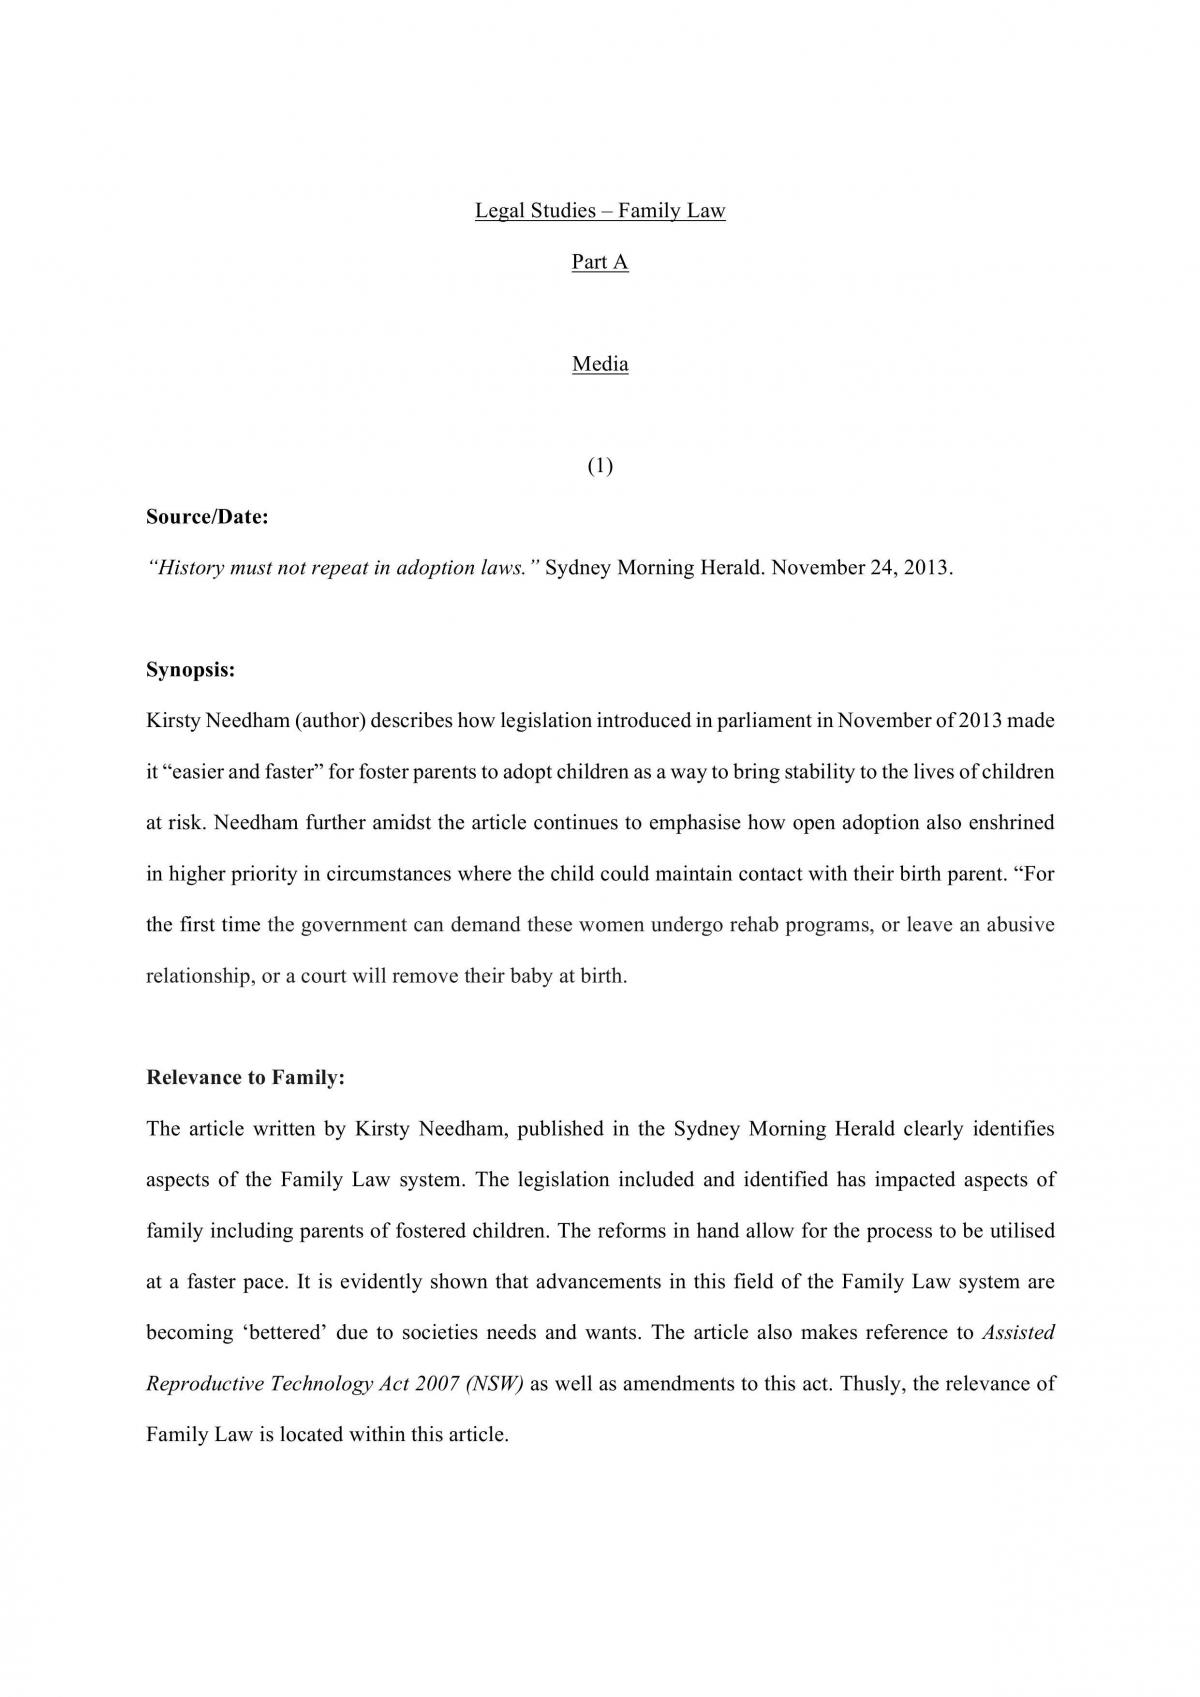 Family Law - Case Analysis and Essay - Page 1